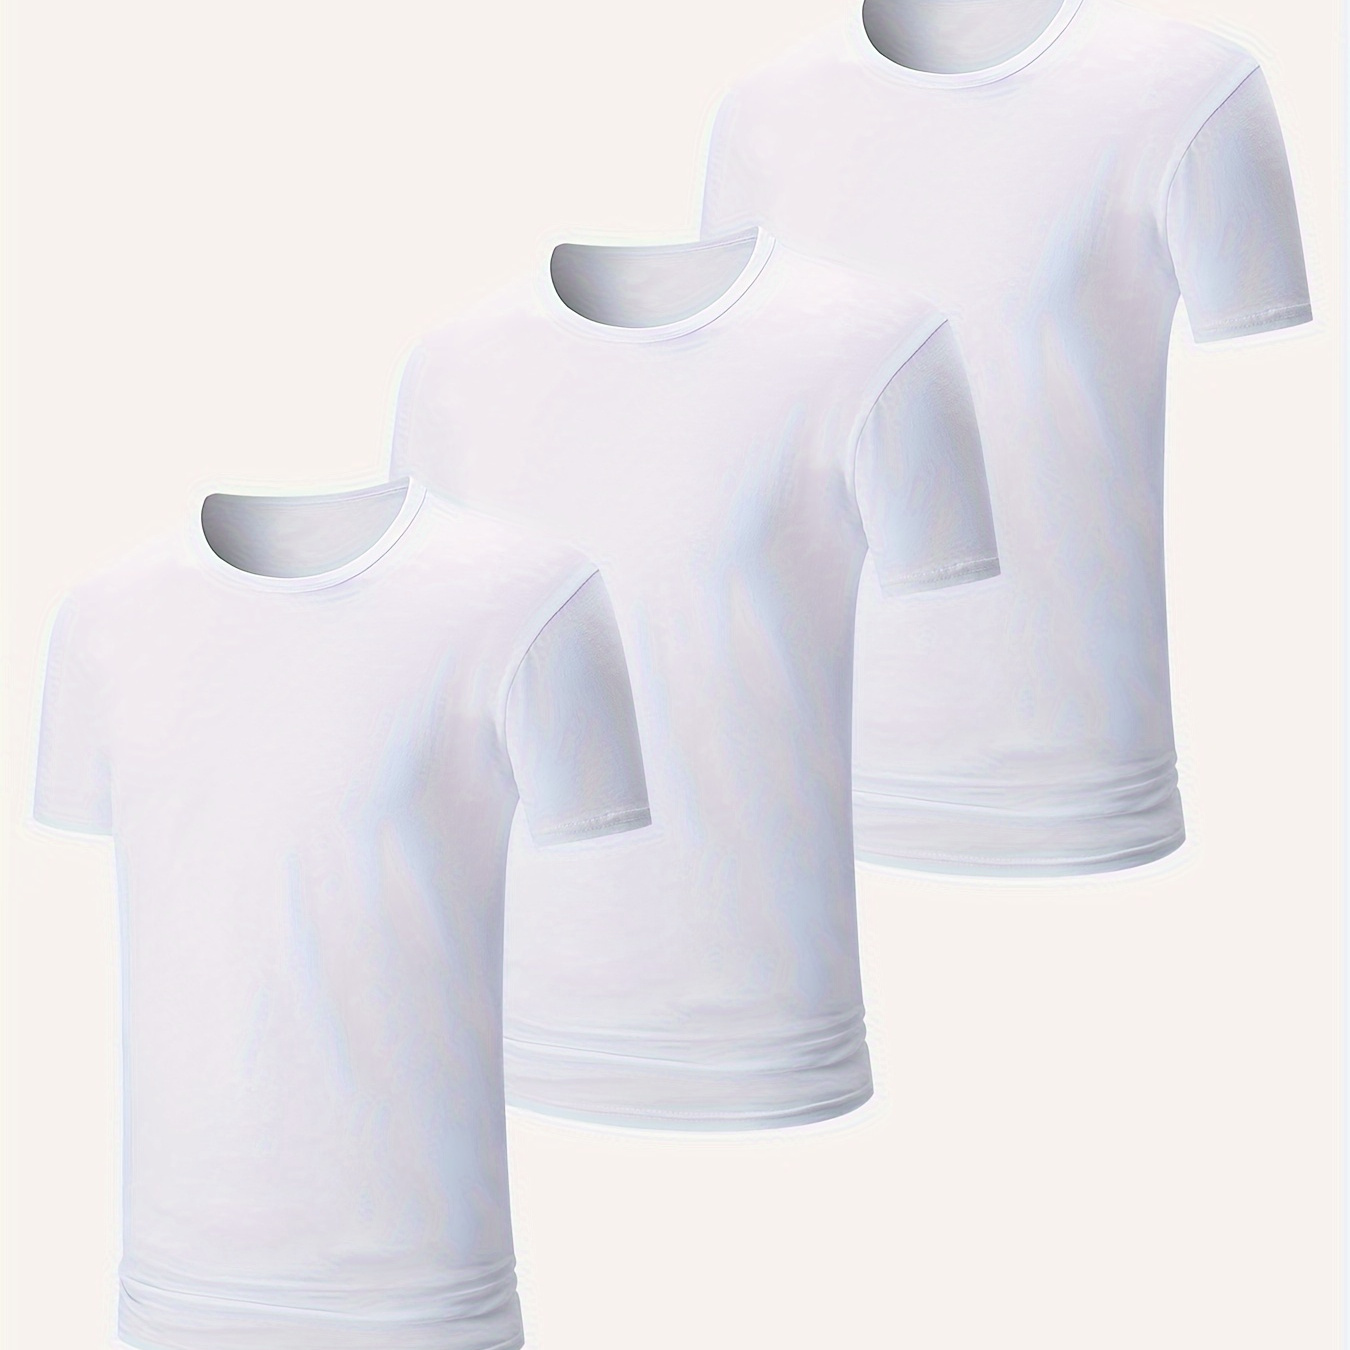 

Men's 3 Pcs White Cotton T-shirts, Classic Fit, Short Sleeve Crew Neck, Solid Color Casual Fashion Tops For Daily Wearing